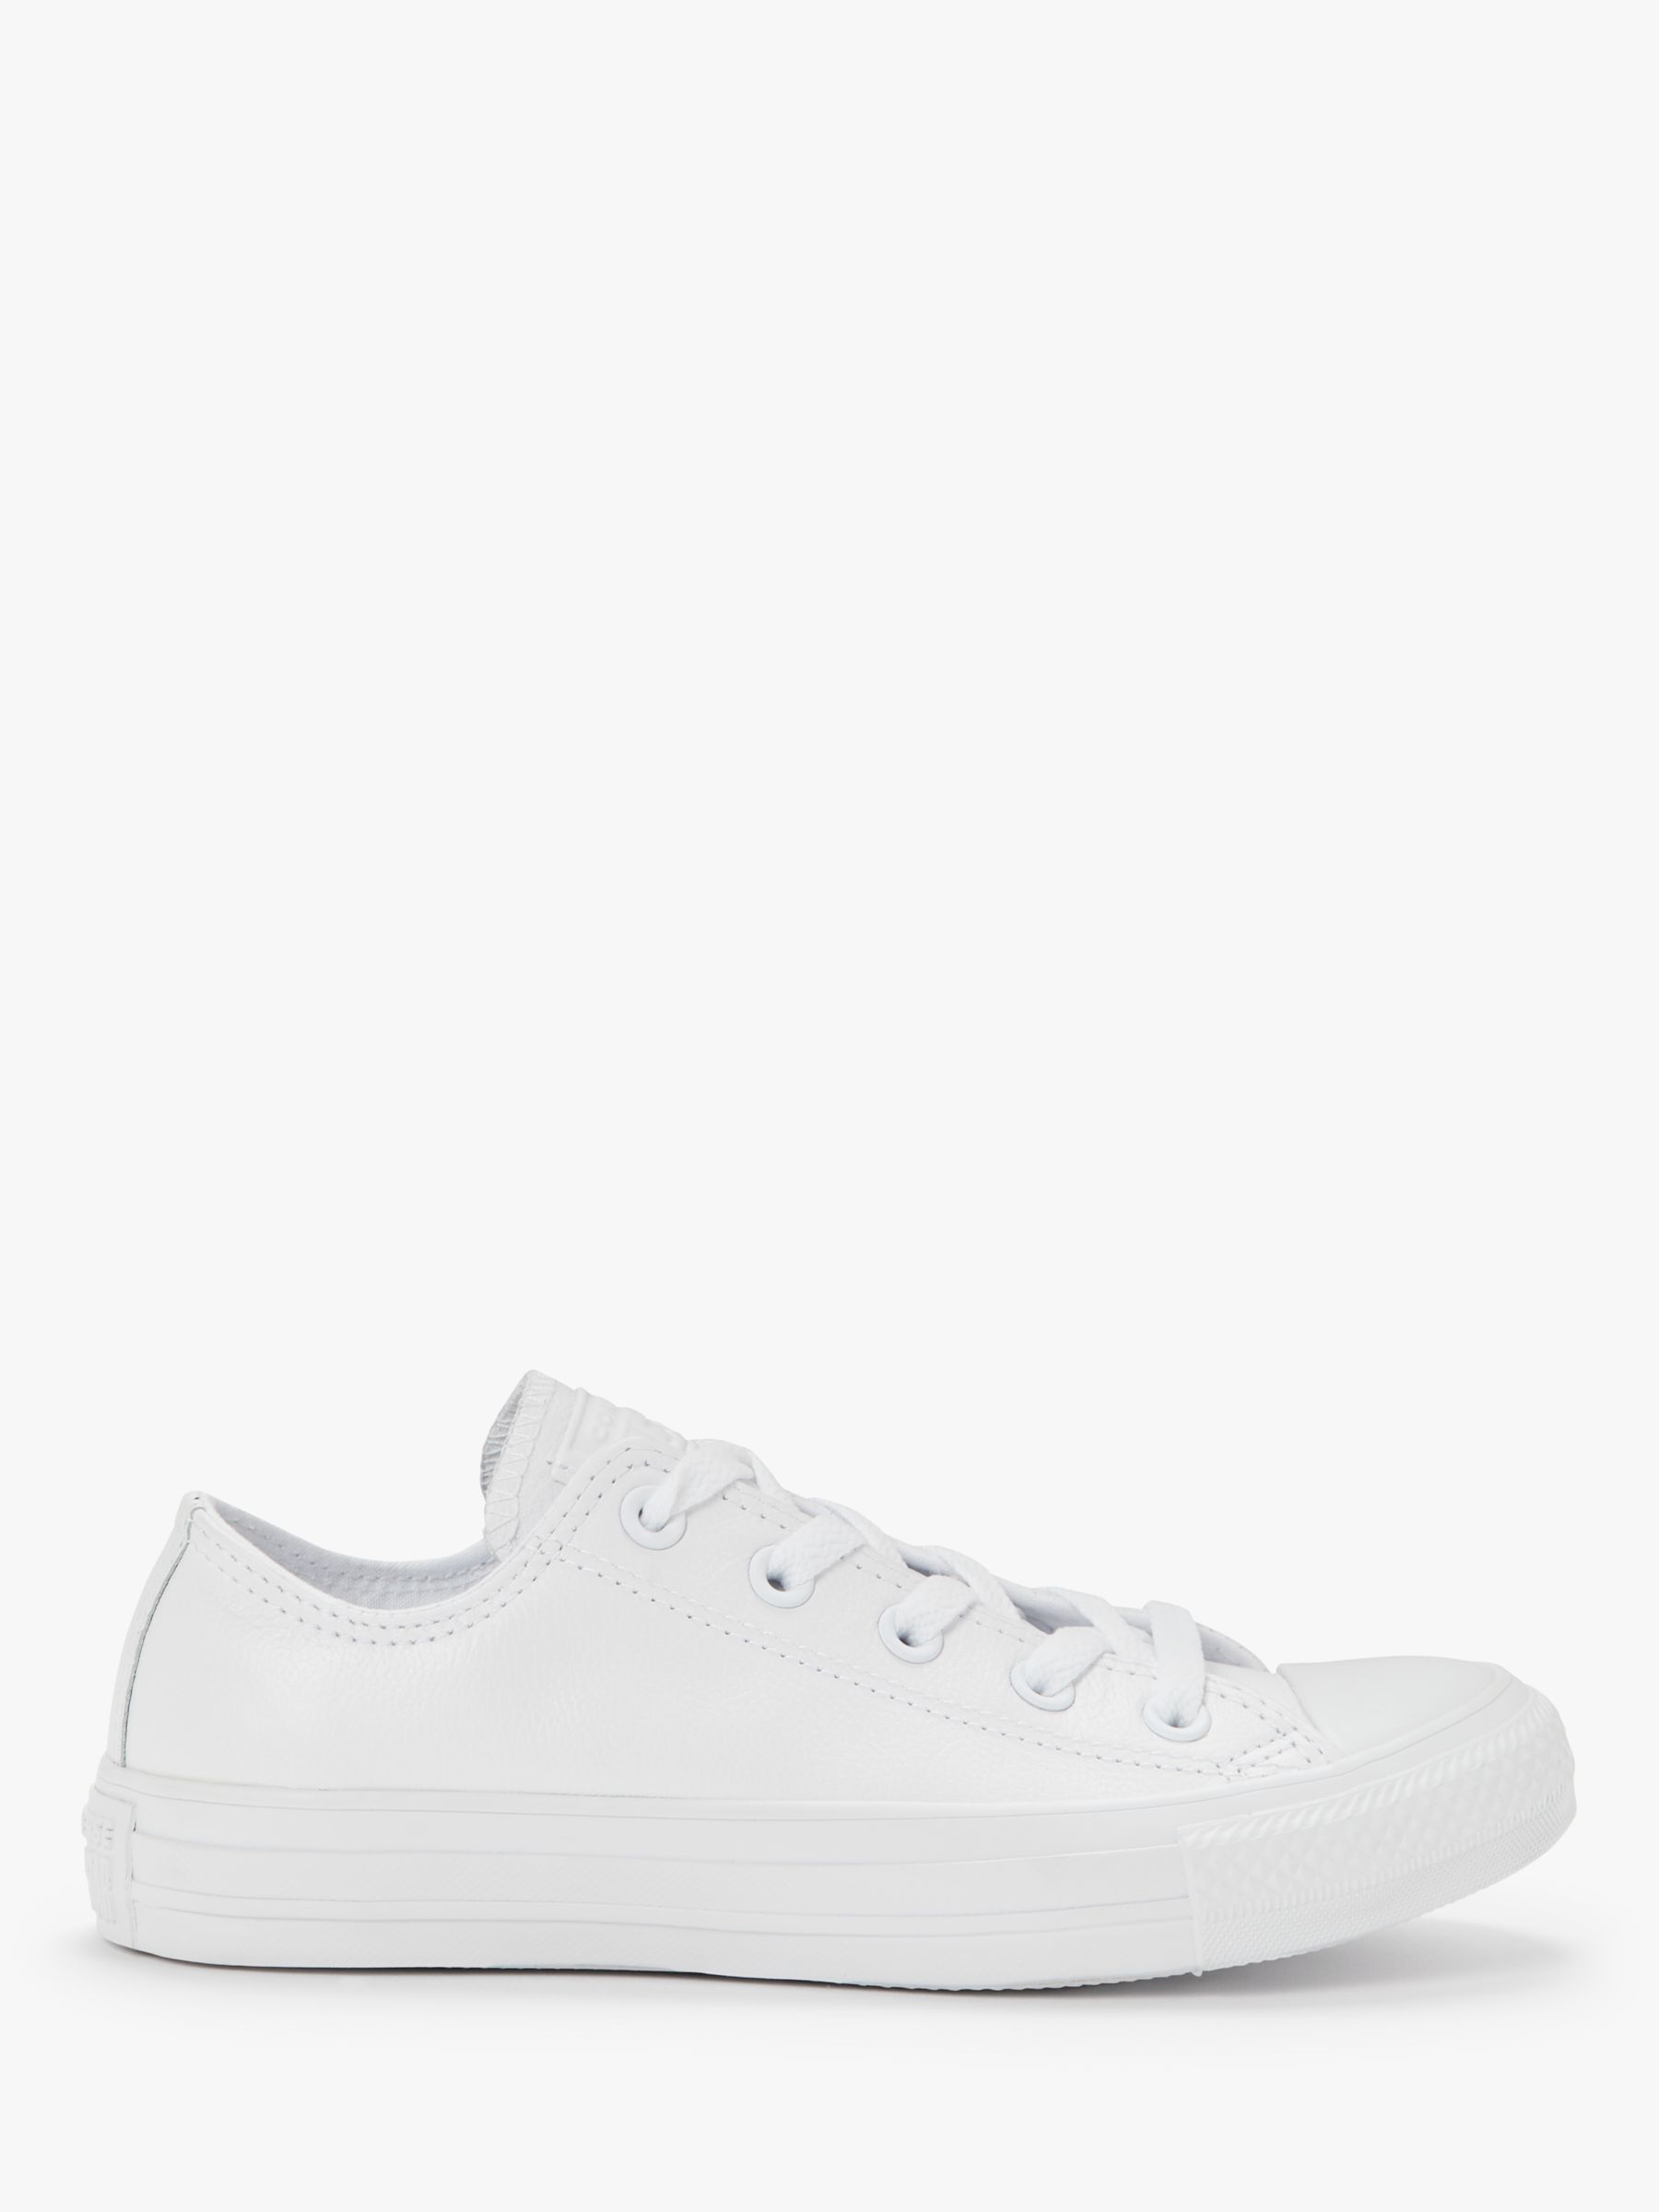 converse leather trainers womens